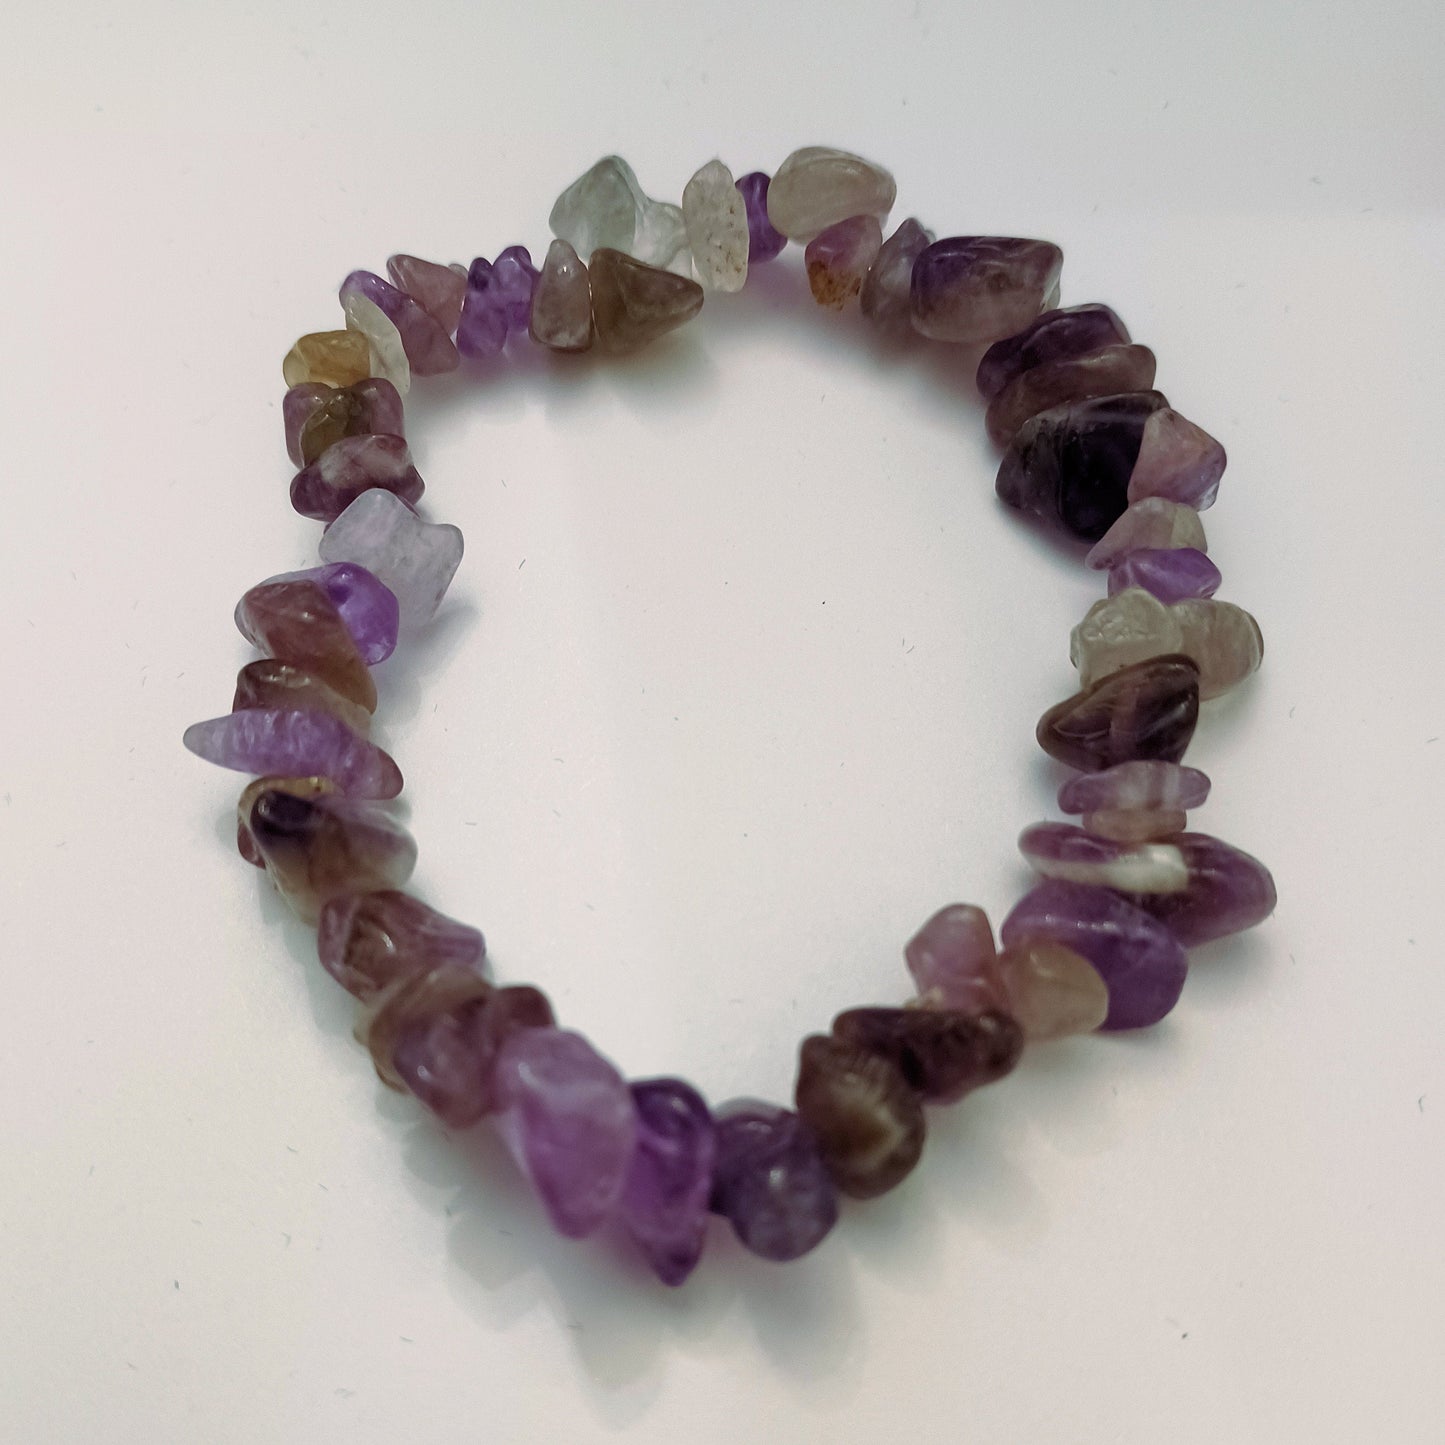 Fluorite and Amethyst Natural Stone Stretch Bracelet